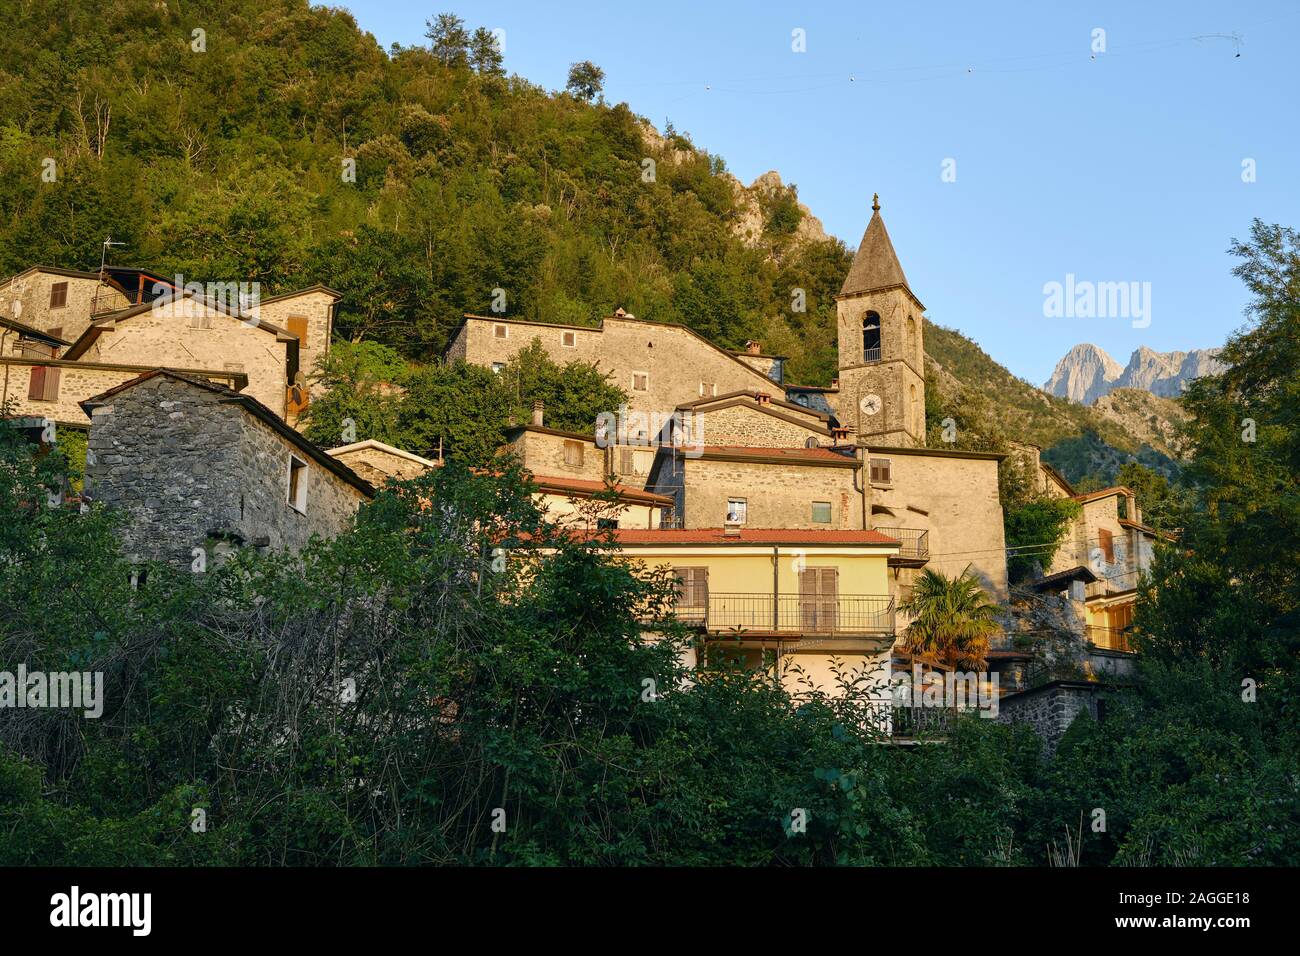 The medieval Apuan mountain village of Equi Terme, Fivizzano, in the province of Massa and Carrara, Tuscany, Italy - Apuane Alps Regional Park Stock Photo